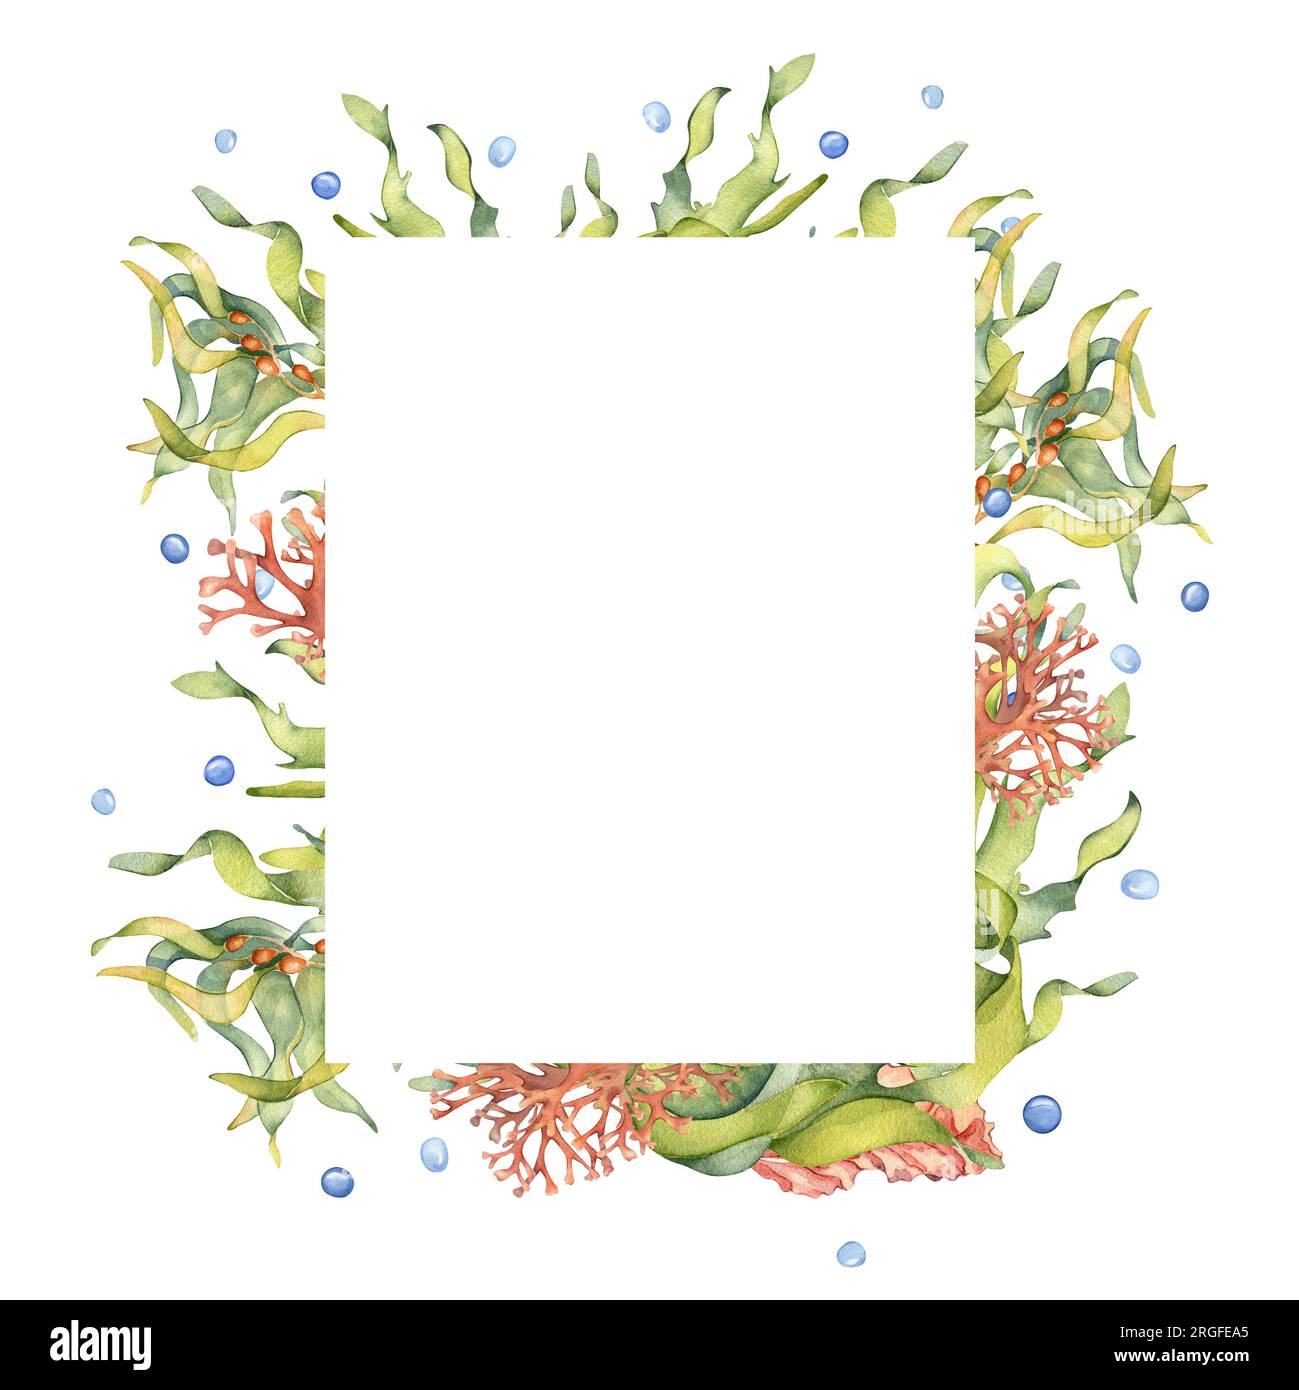 Frame of green sea plant watercolor illustration isolated on white background. Laminaria, brown kelp, red seaweed hand drawn. Design element for packa Stock Photo